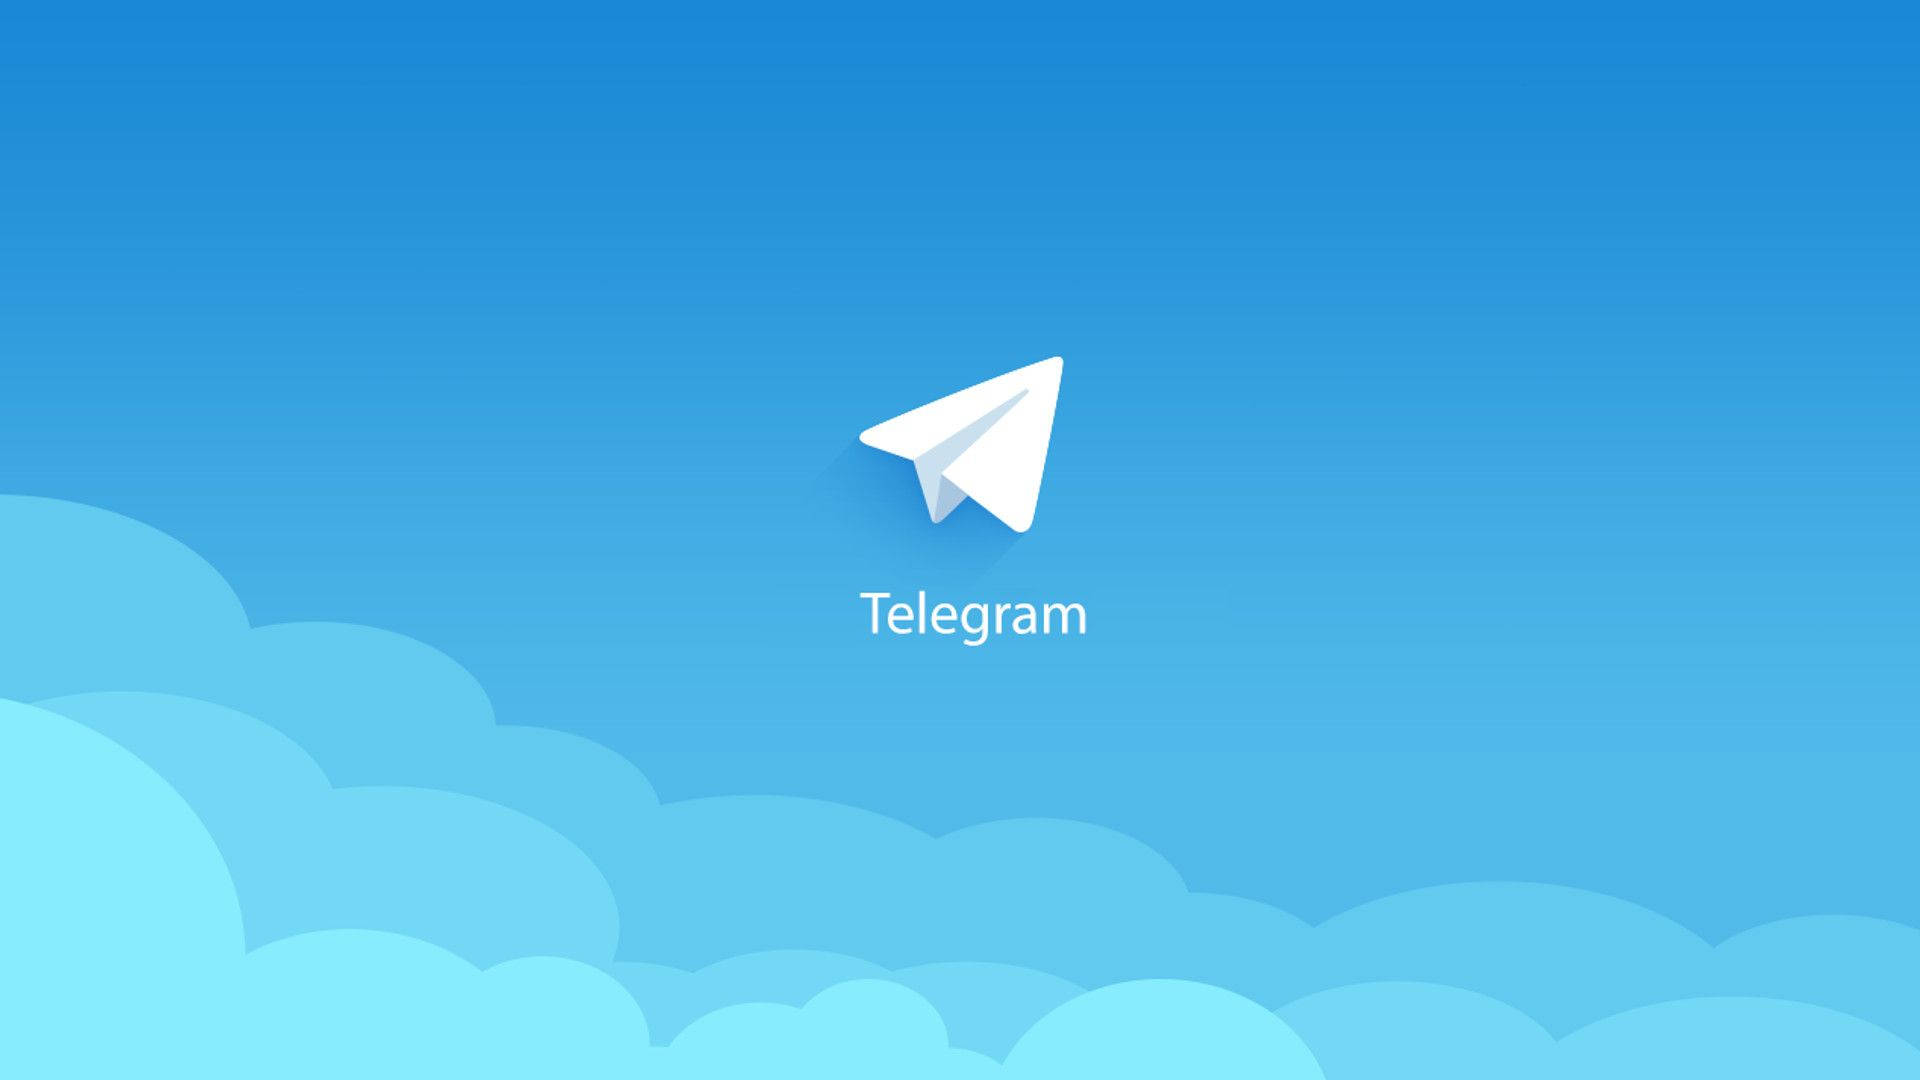 Telegram Clouds With Word